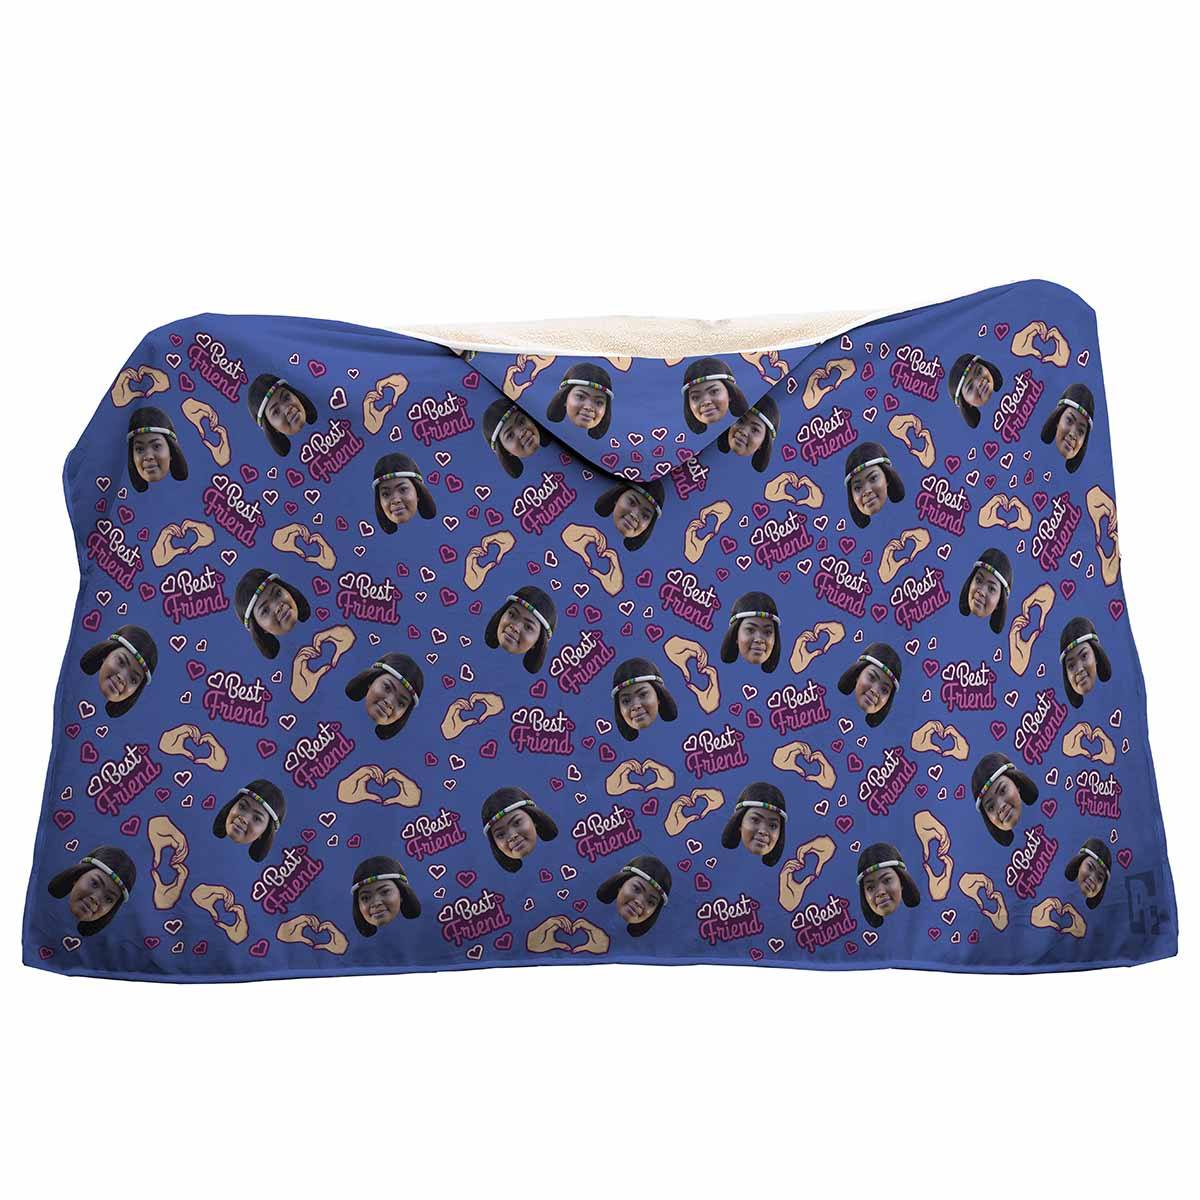 darkblue BFF for Her hooded blanket personalized with photo of face printed on it